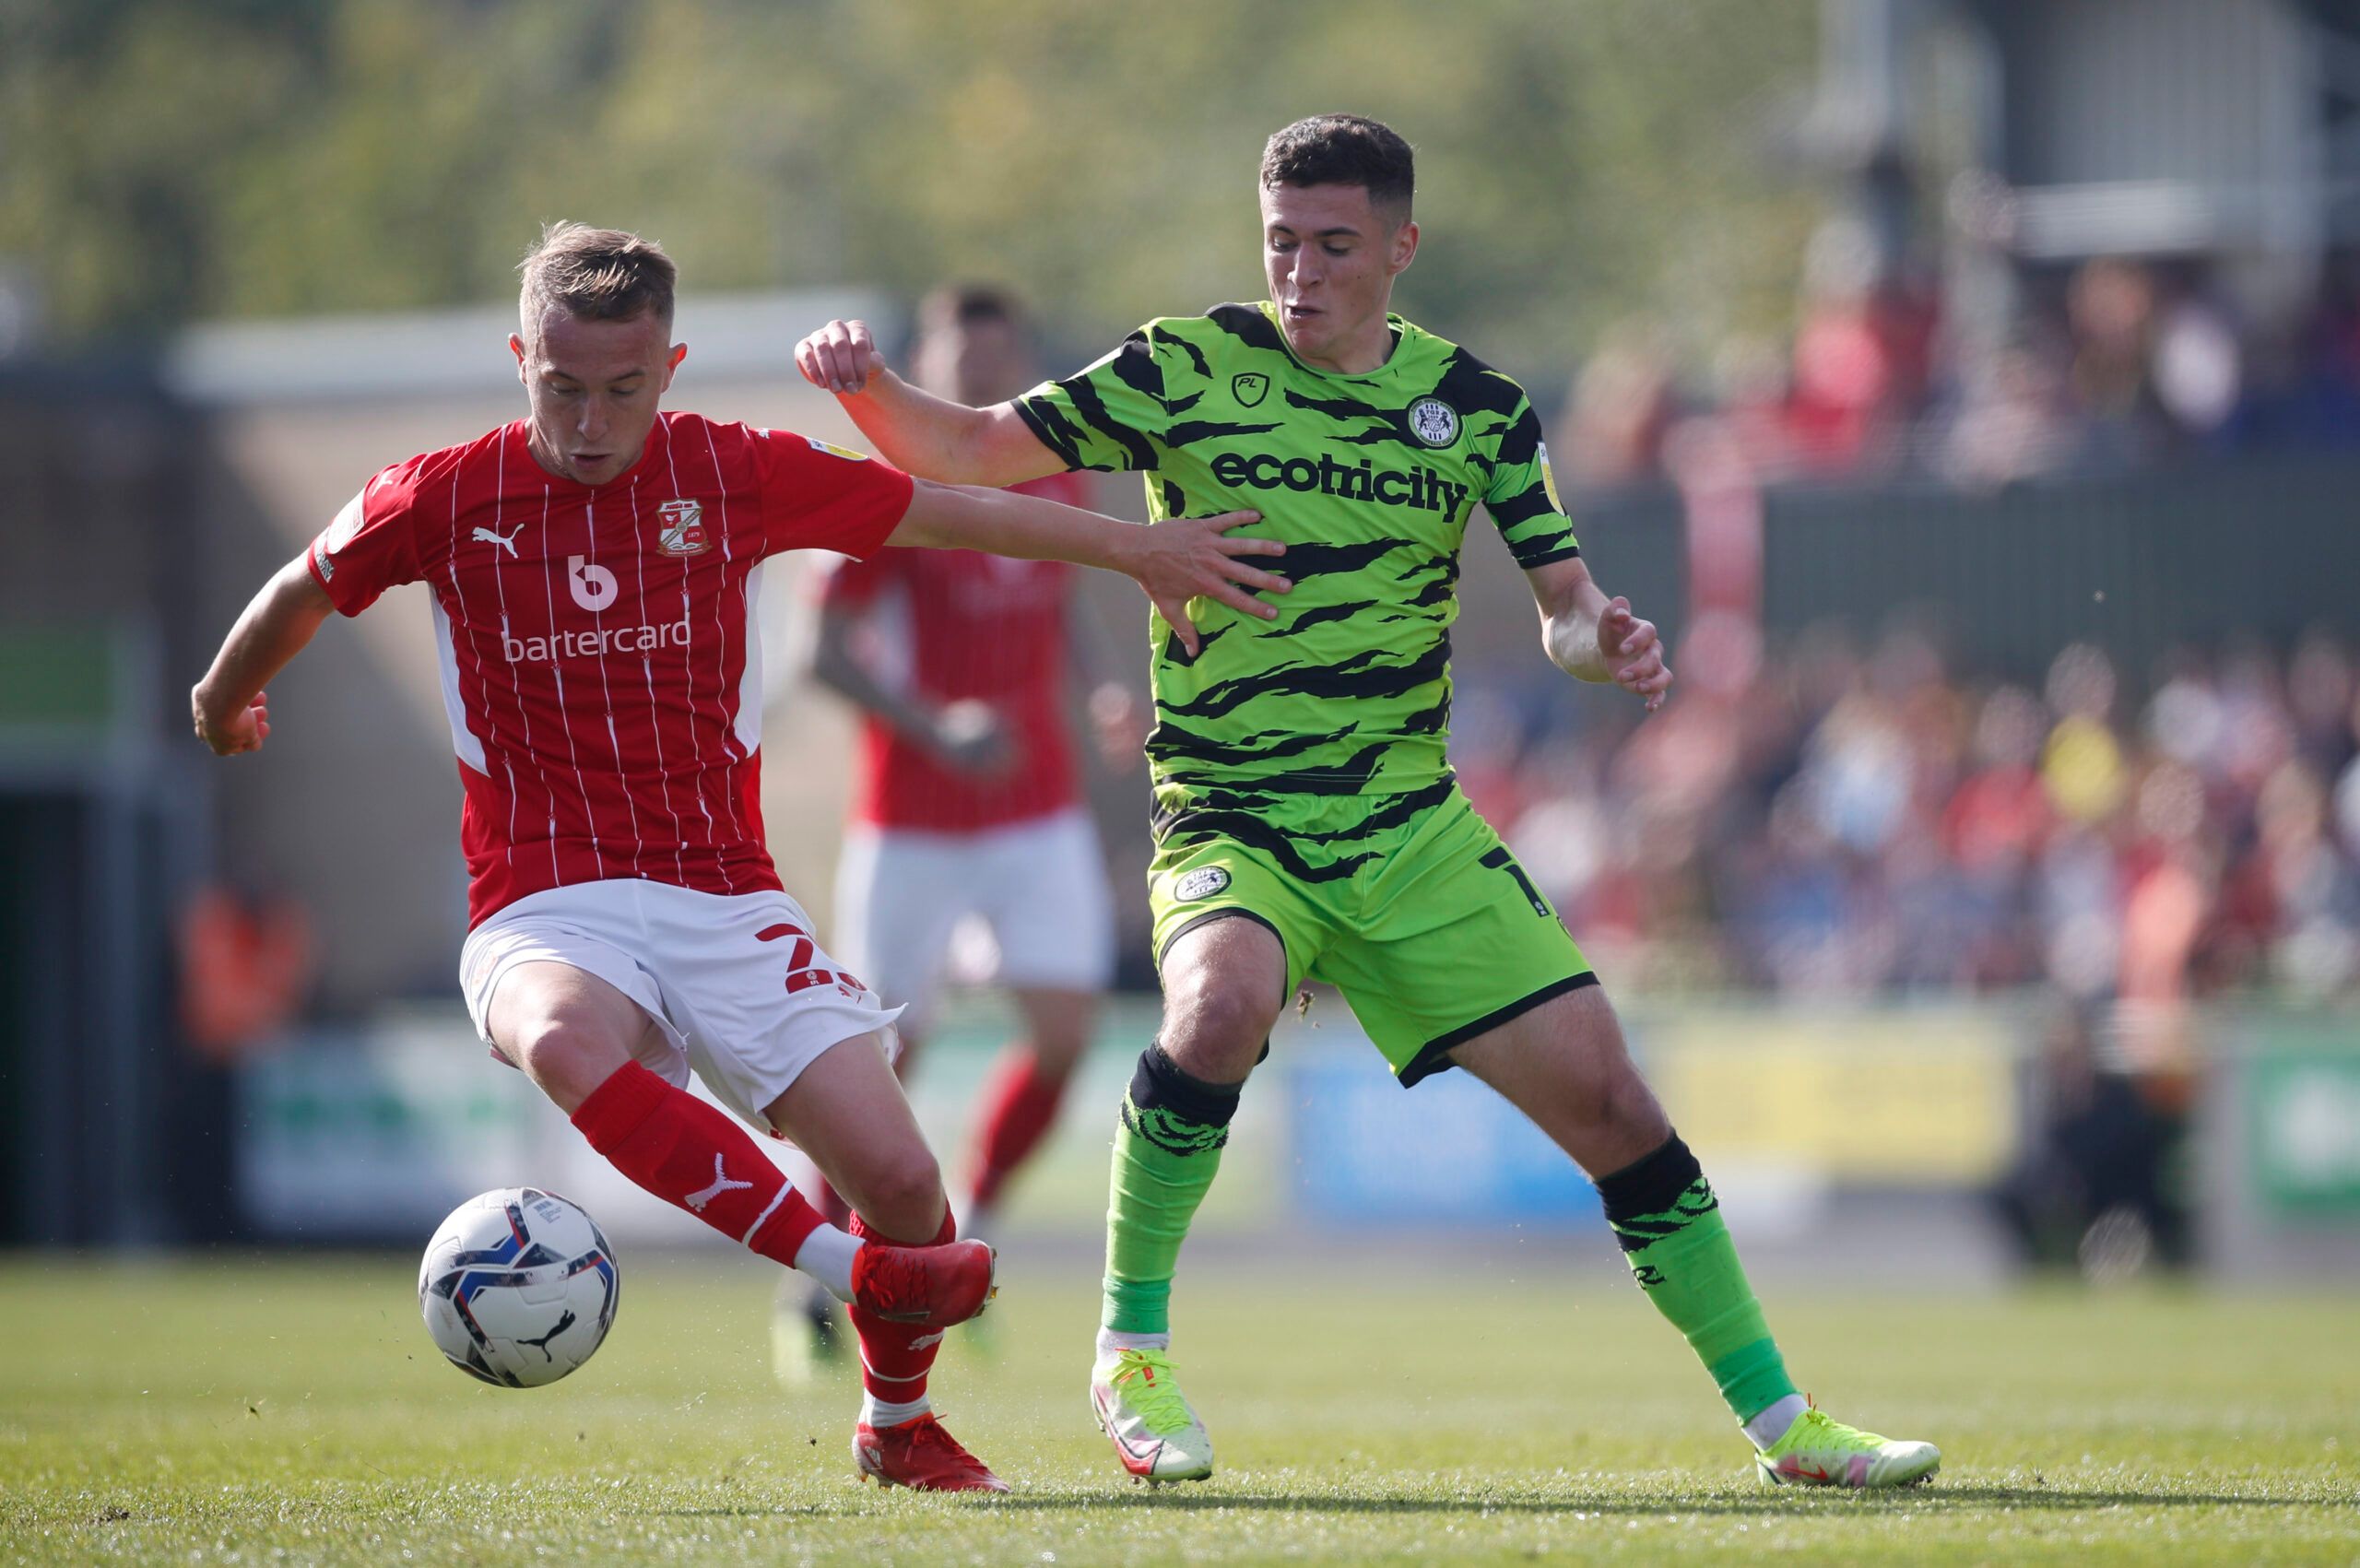 Soccer Football - League Two - Forest Green Rovers v Swindon Town - The New Lawn Stadium, Nailsworth, Britain - October 9, 2021 Forest Green Rovers’ Jack Aitchison in action with Swindon Town’s Louis Reed Action Images/Matthew Childs EDITORIAL USE ONLY. No use with unauthorized audio, video, data, fixture lists, club/league logos or 'live' services. Online in-match use limited to 75 images, no video emulation. No use in betting, games or single club /league/player publications.  Please contact y